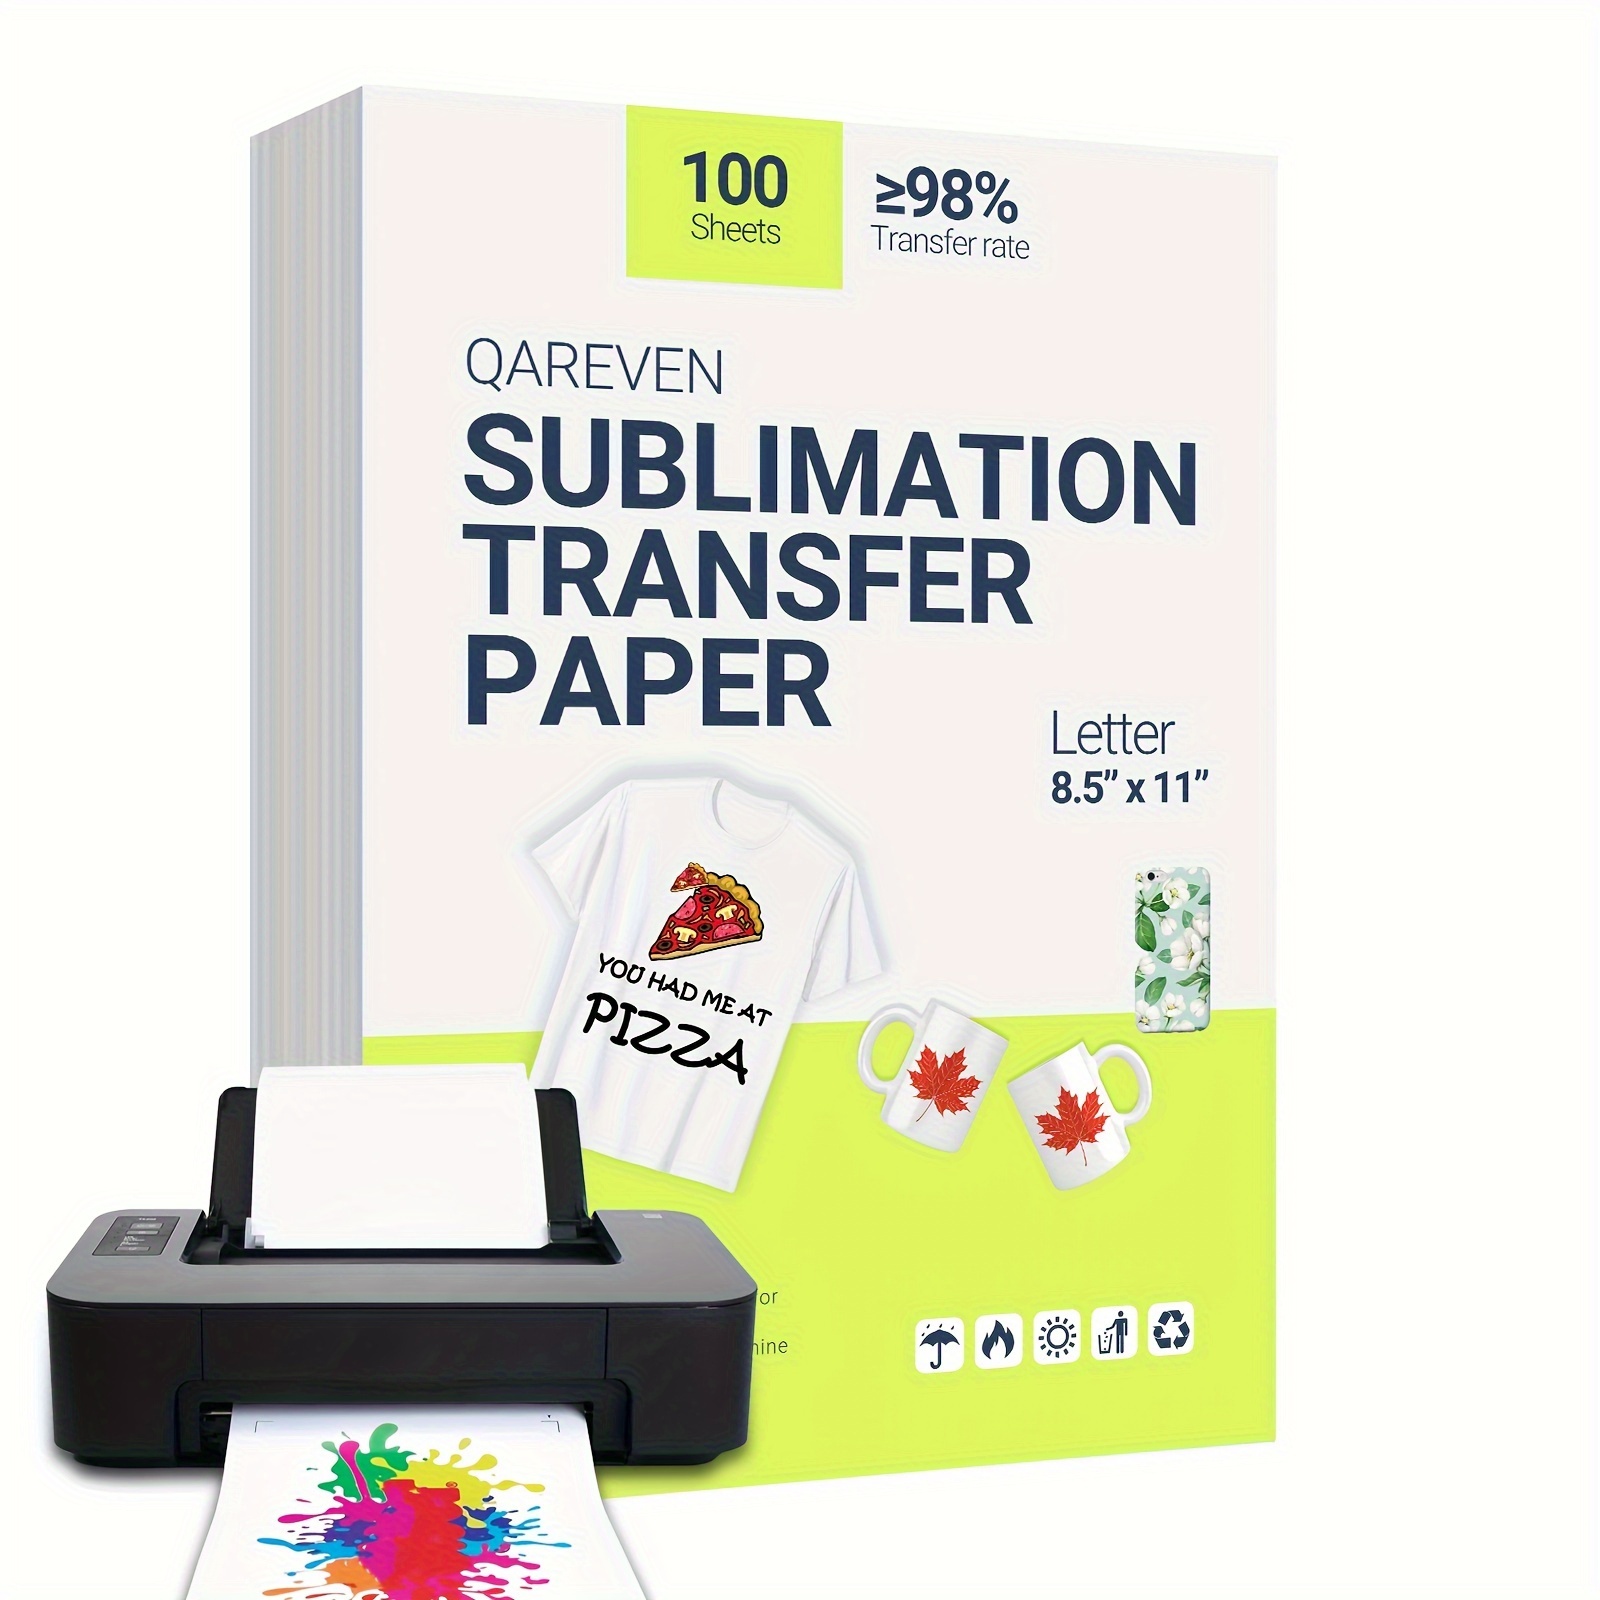 i-Tech Printable Magnetic Sheet - 3D Sublimation Machine Supplier  Philippines